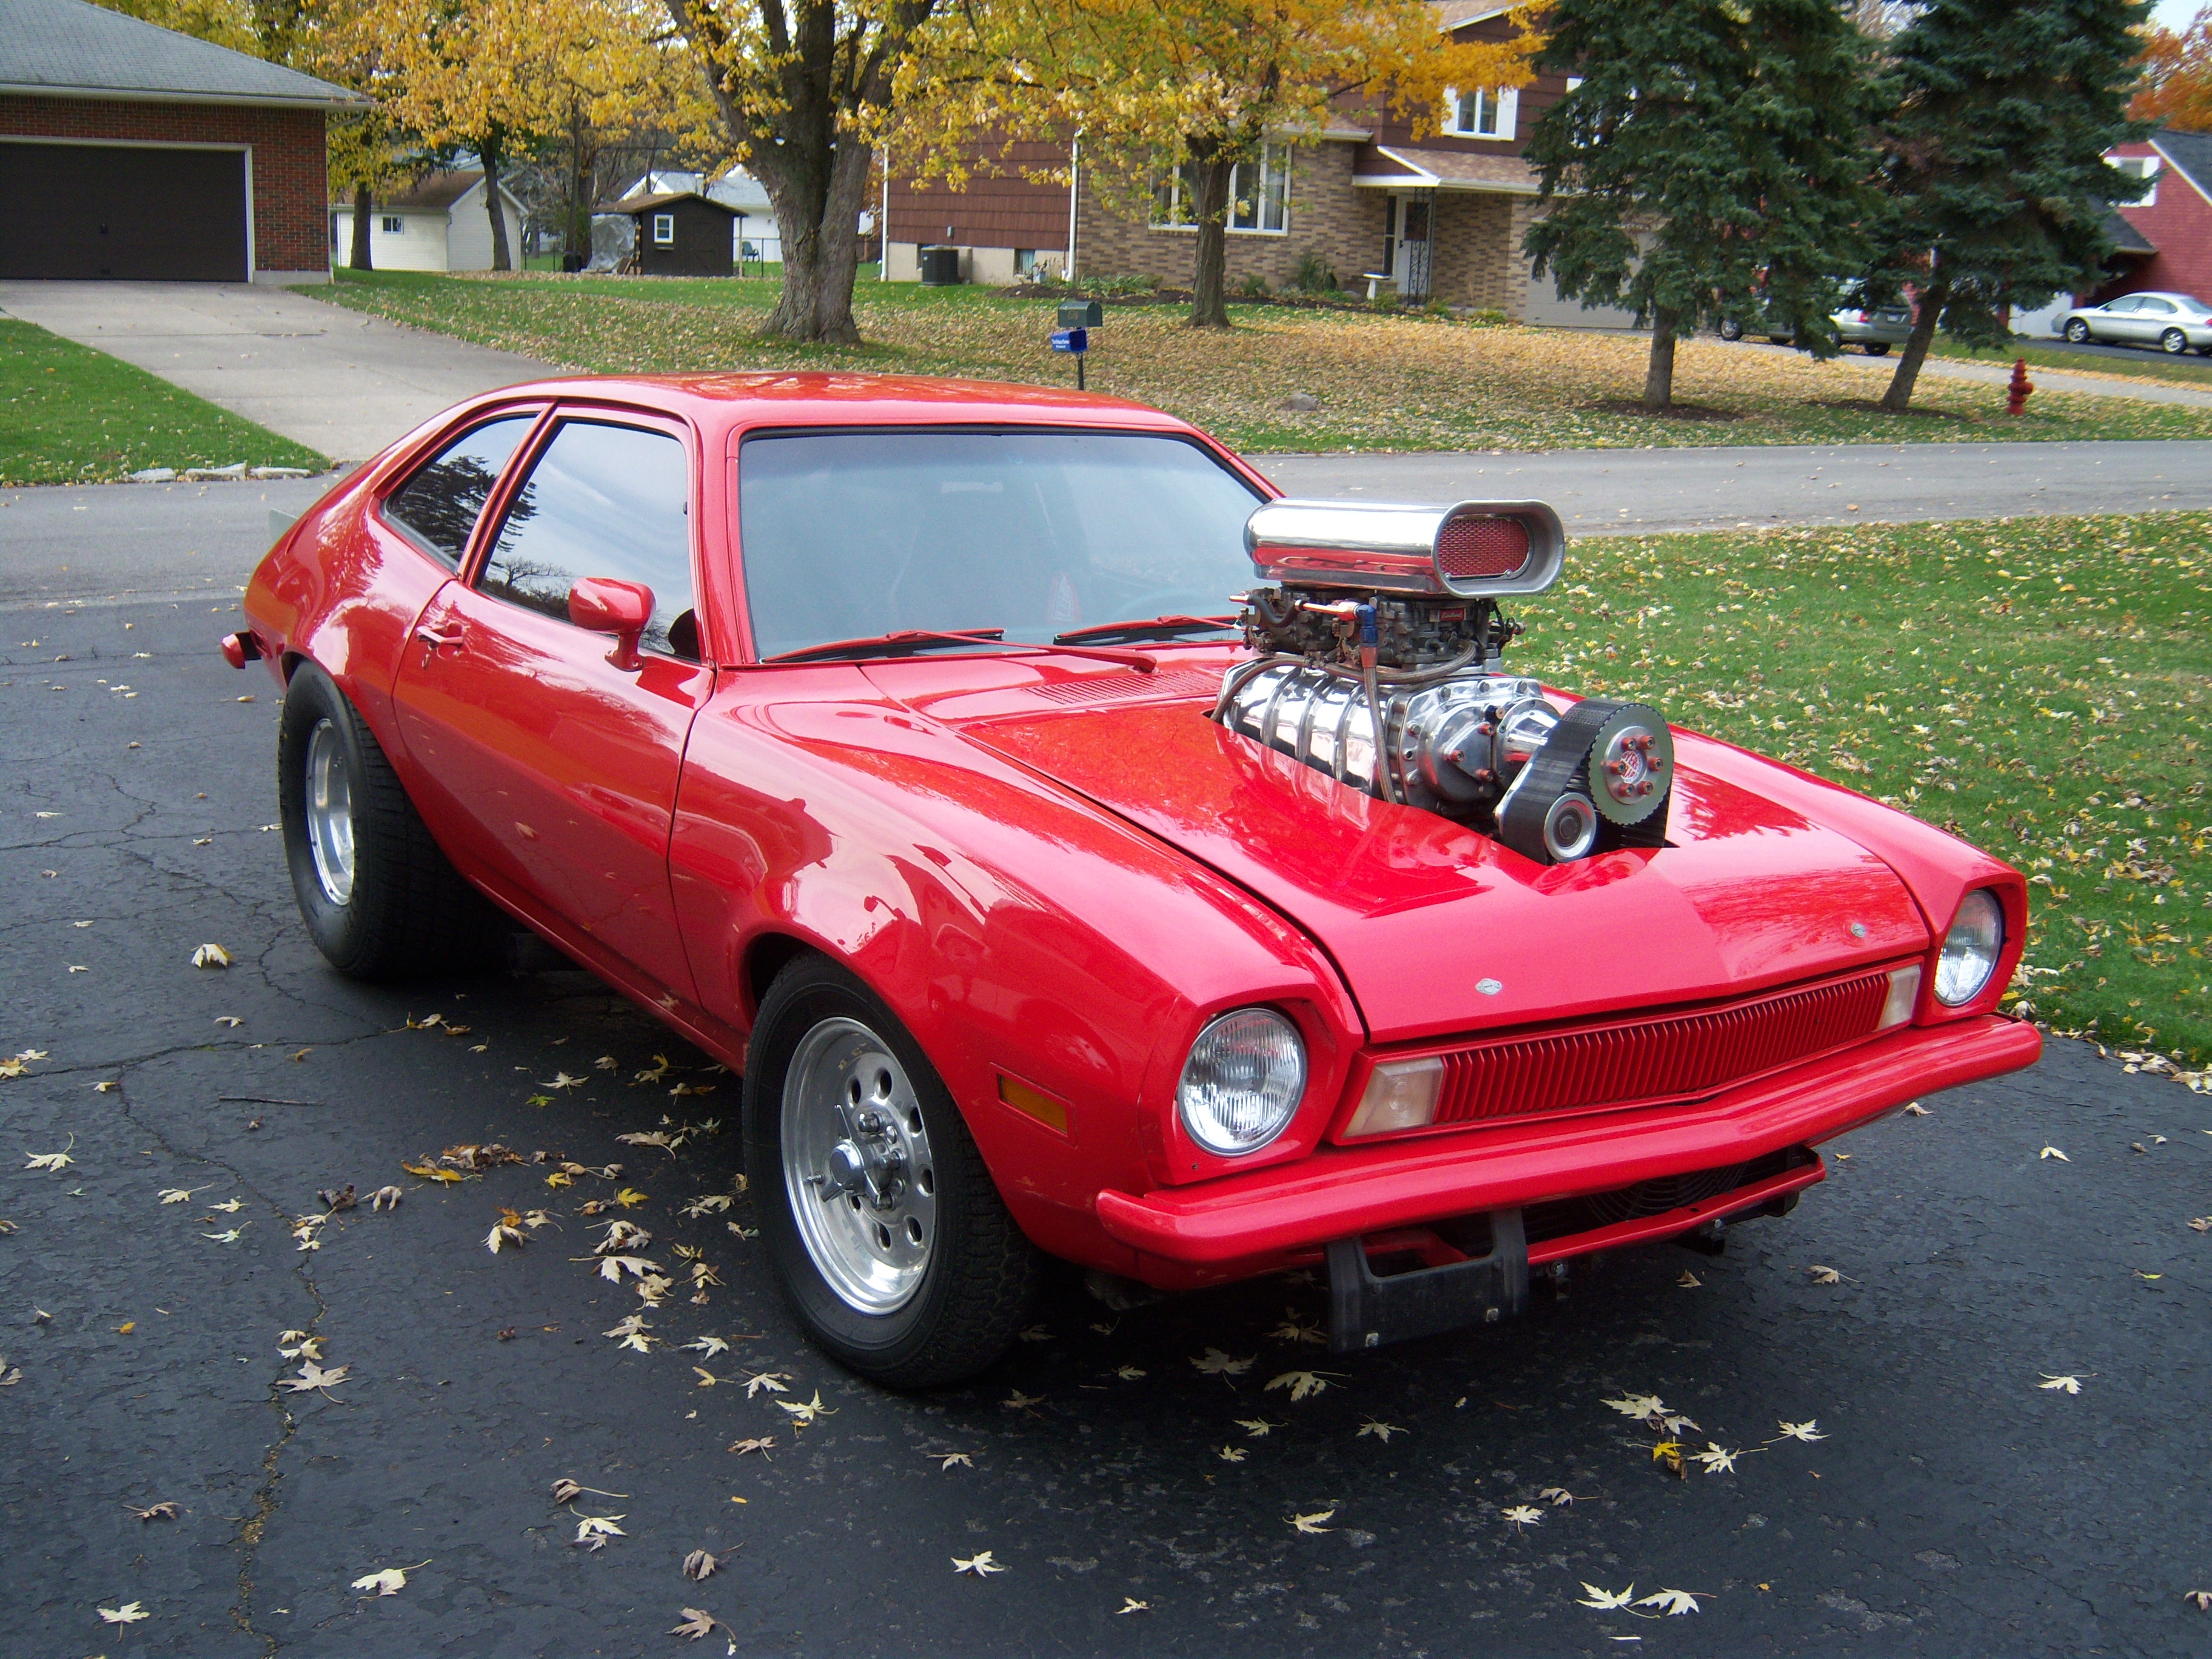 HQ Ford Pinto Wallpapers | File 2582.42Kb